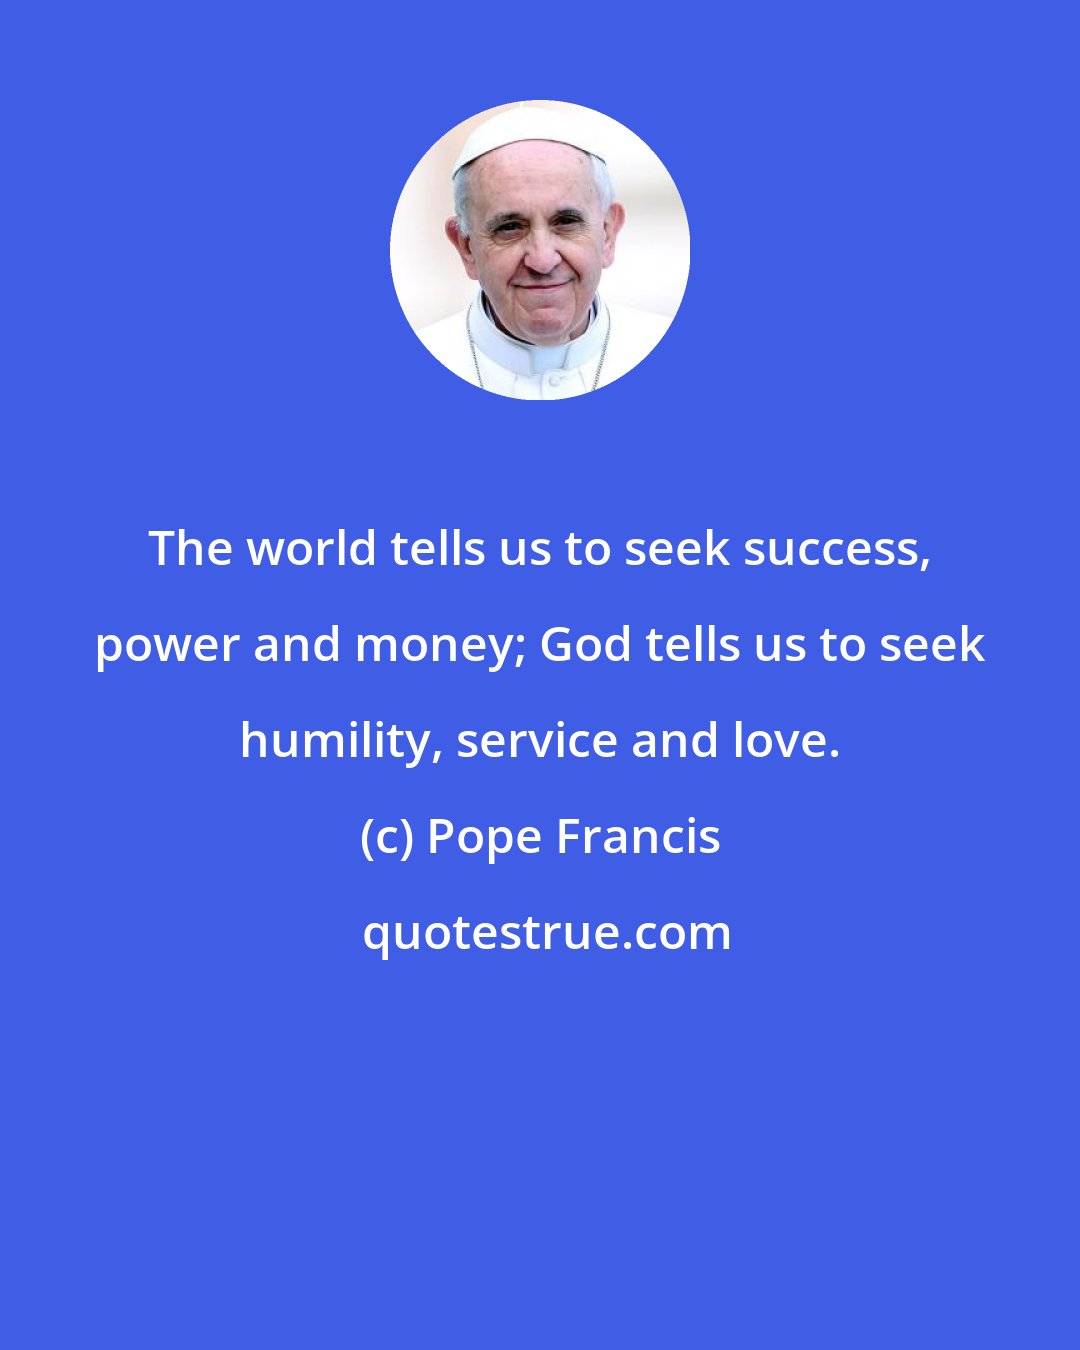 Pope Francis: The world tells us to seek success, power and money; God tells us to seek humility, service and love.